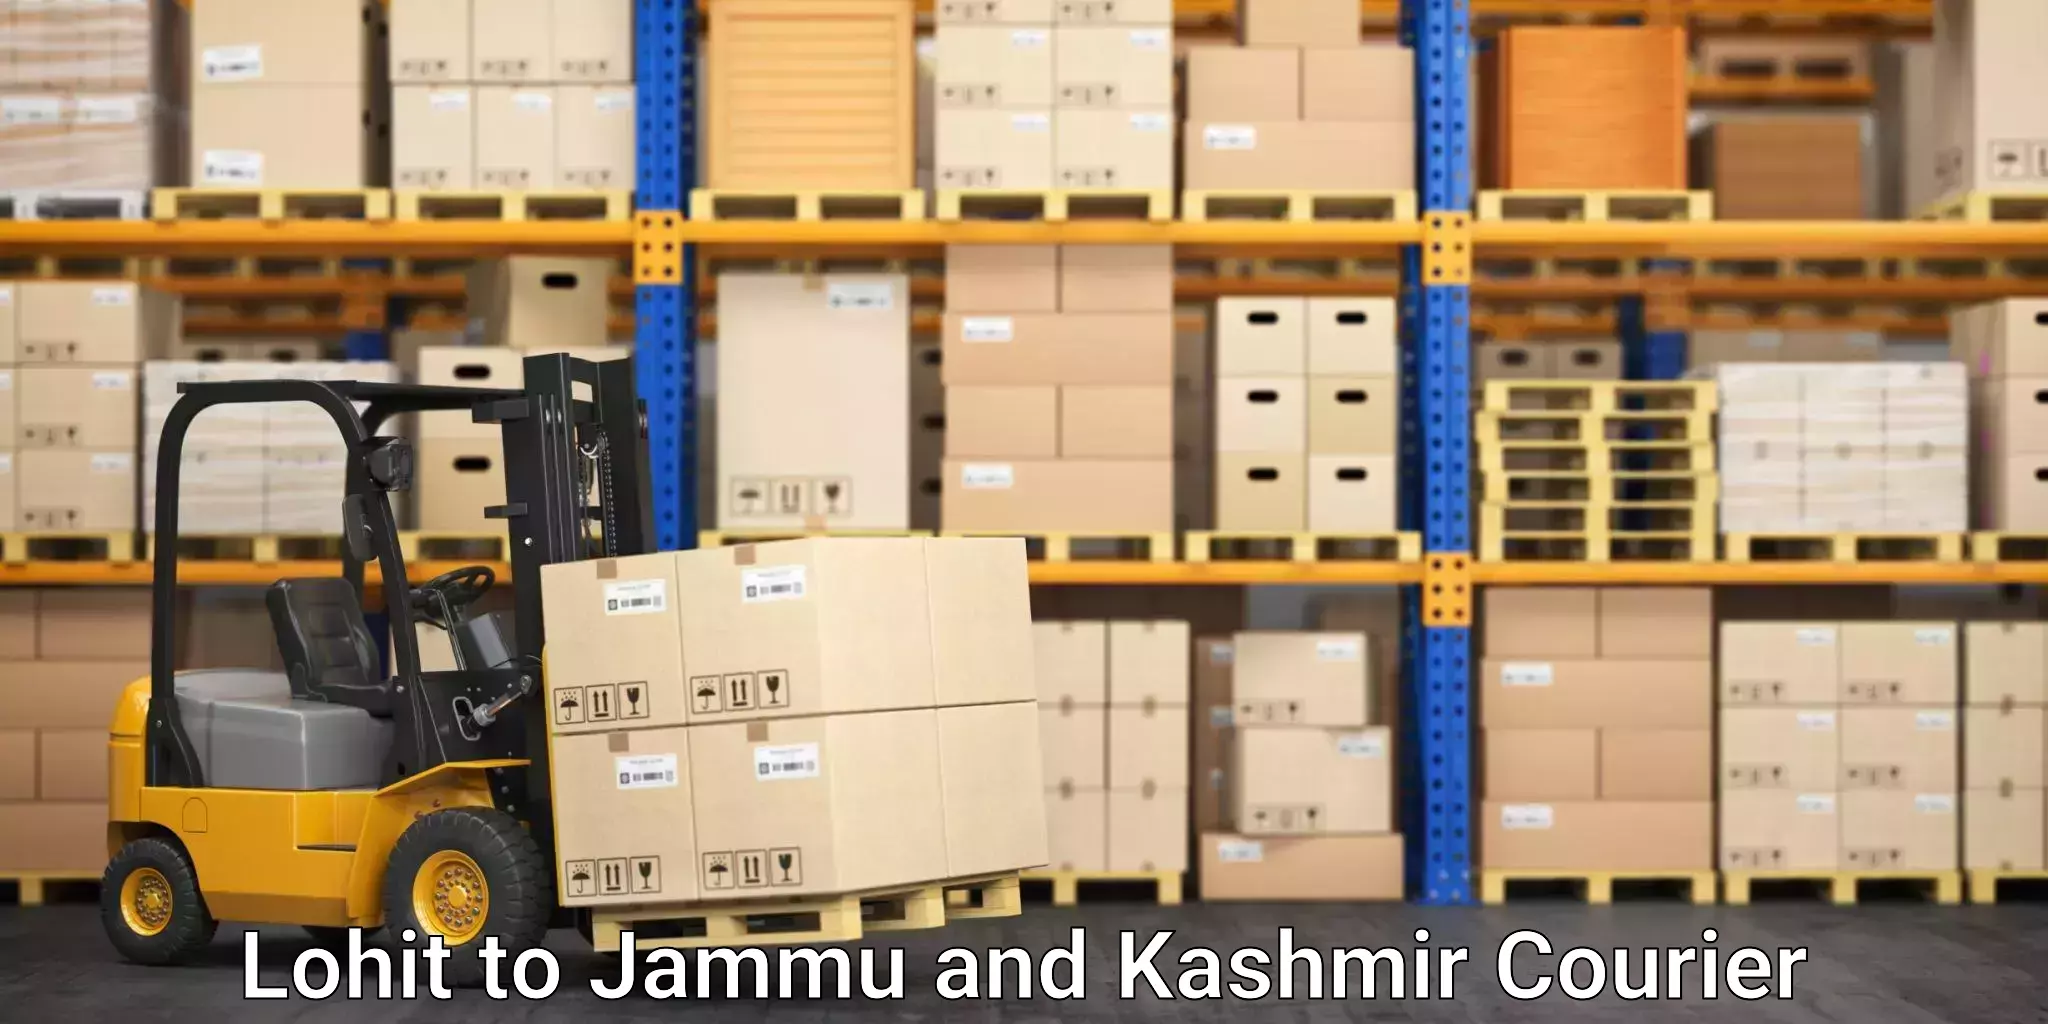 Efficient package consolidation Lohit to Jammu